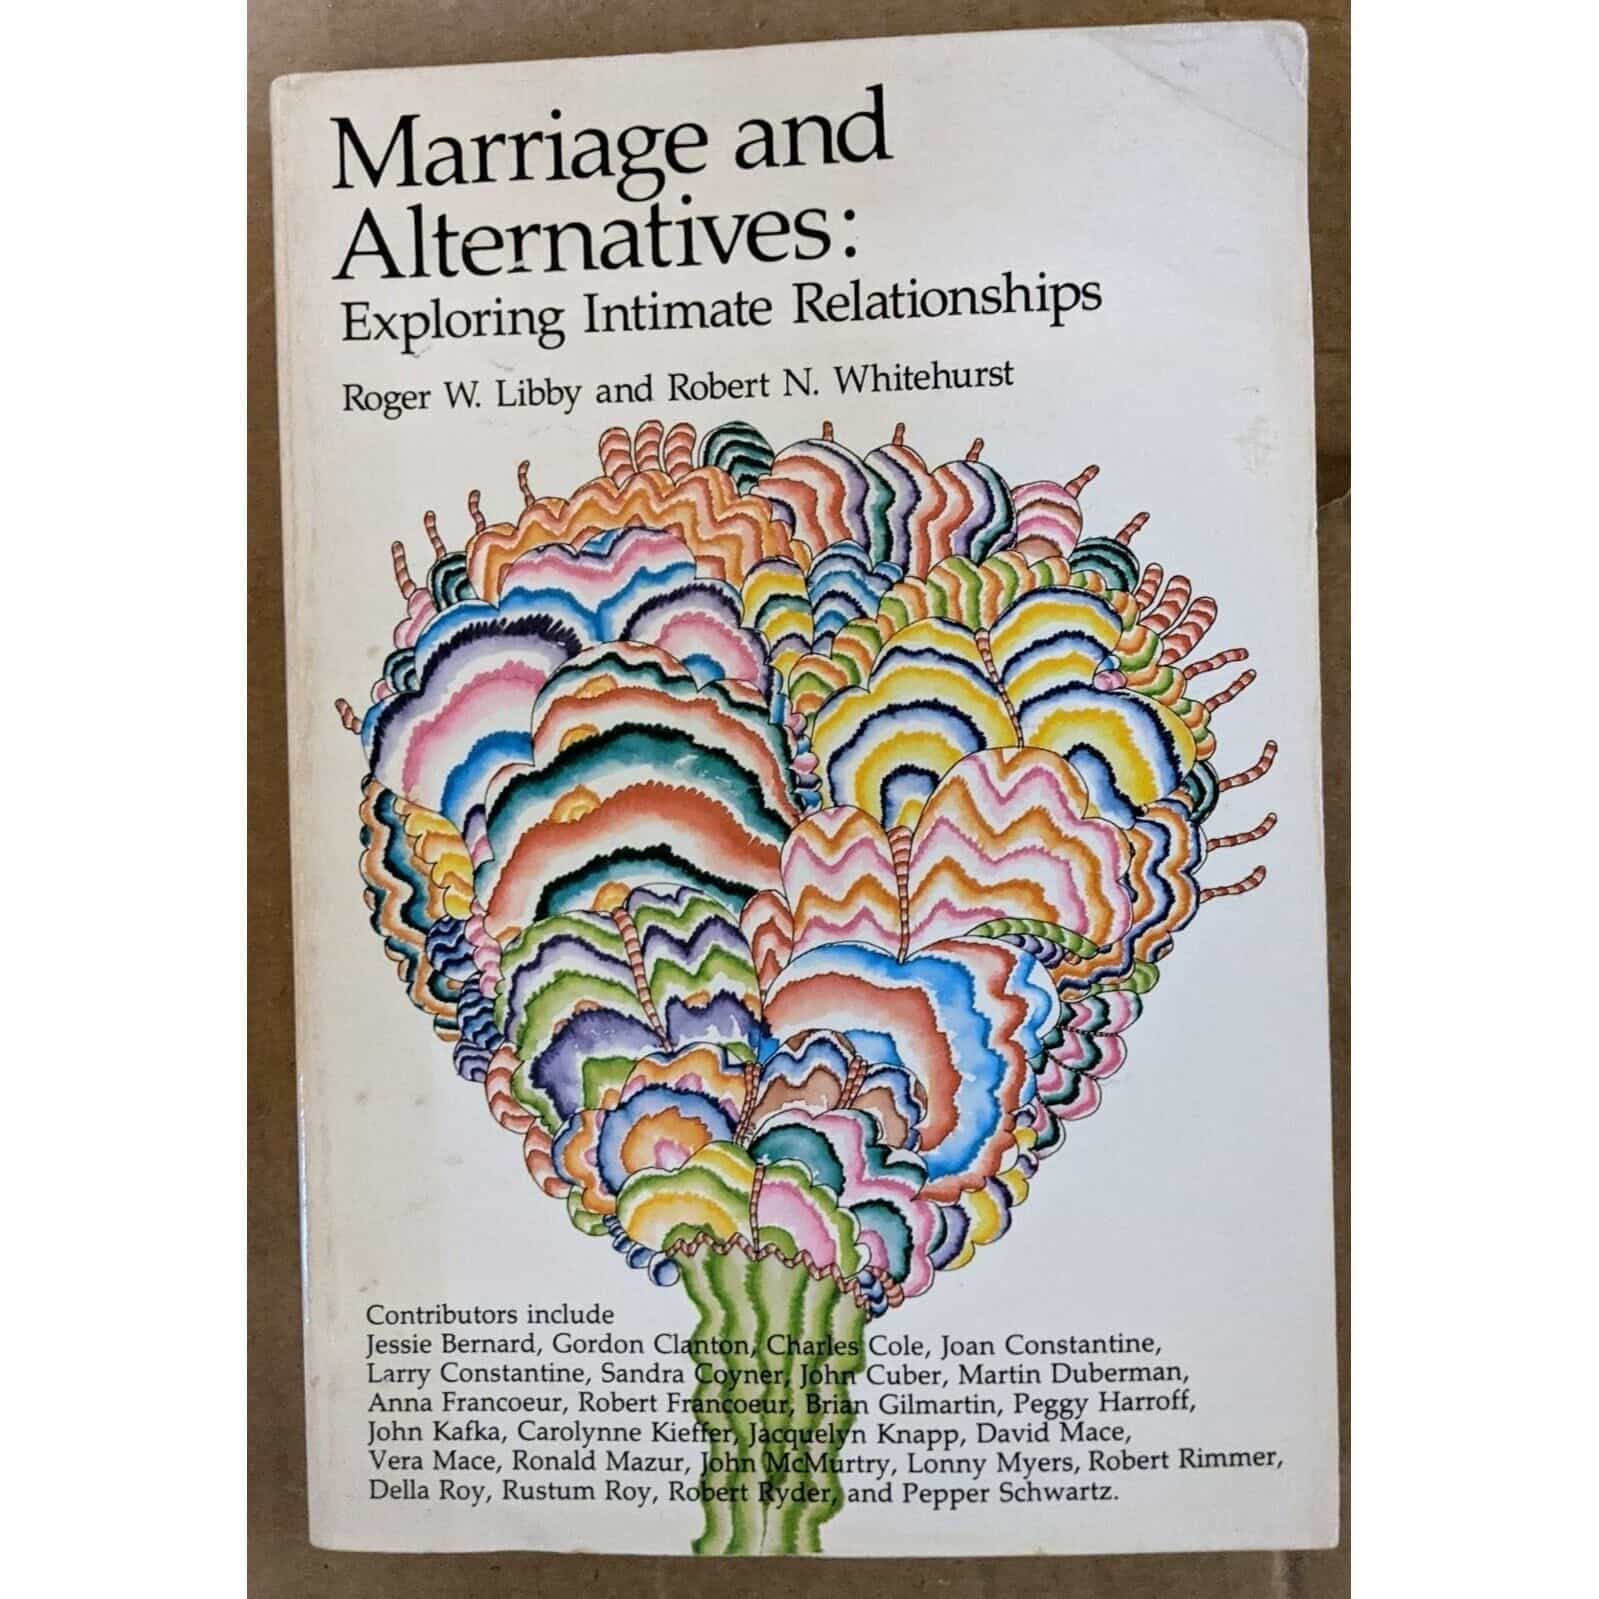 Marriage And Alternatives: Exploring Intimate Relationships by Roger W. Libby